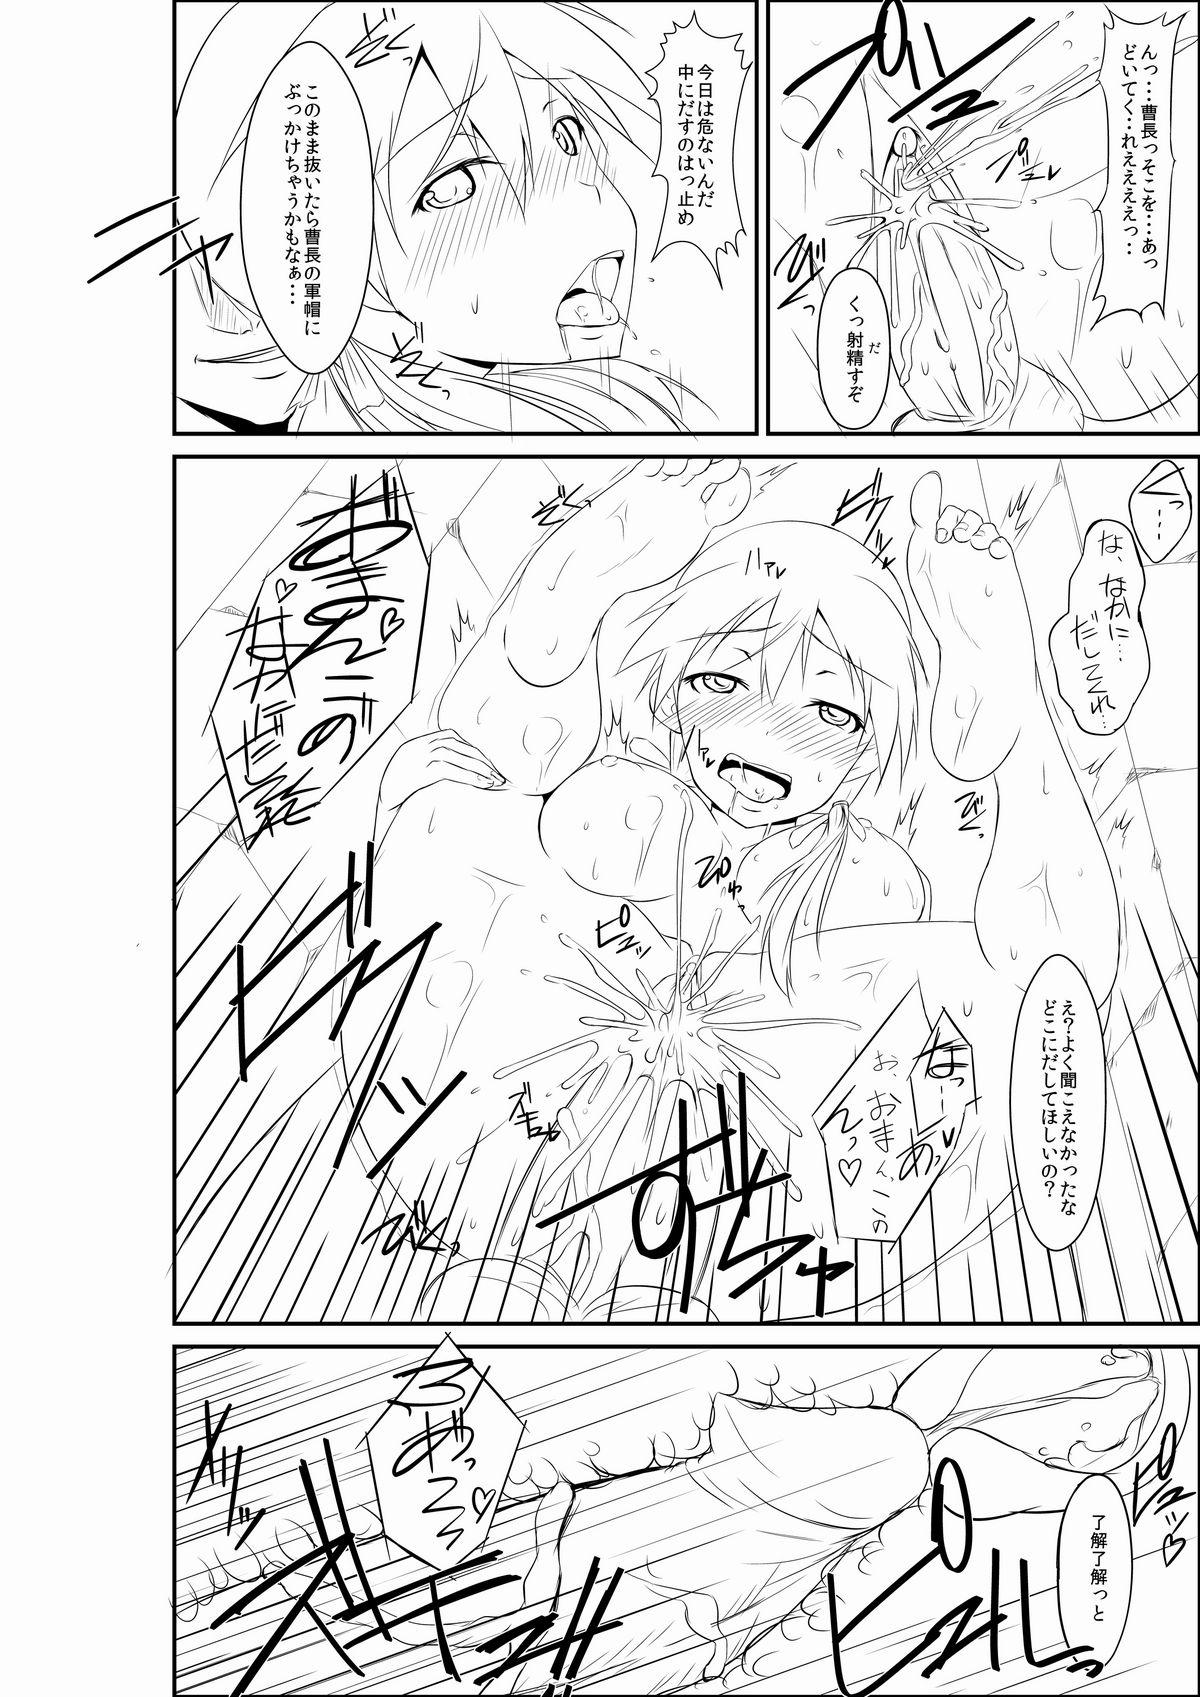 Gaping 練習 お姉ちゃんとヘルマちゃん - Strike witches Juggs - Page 10